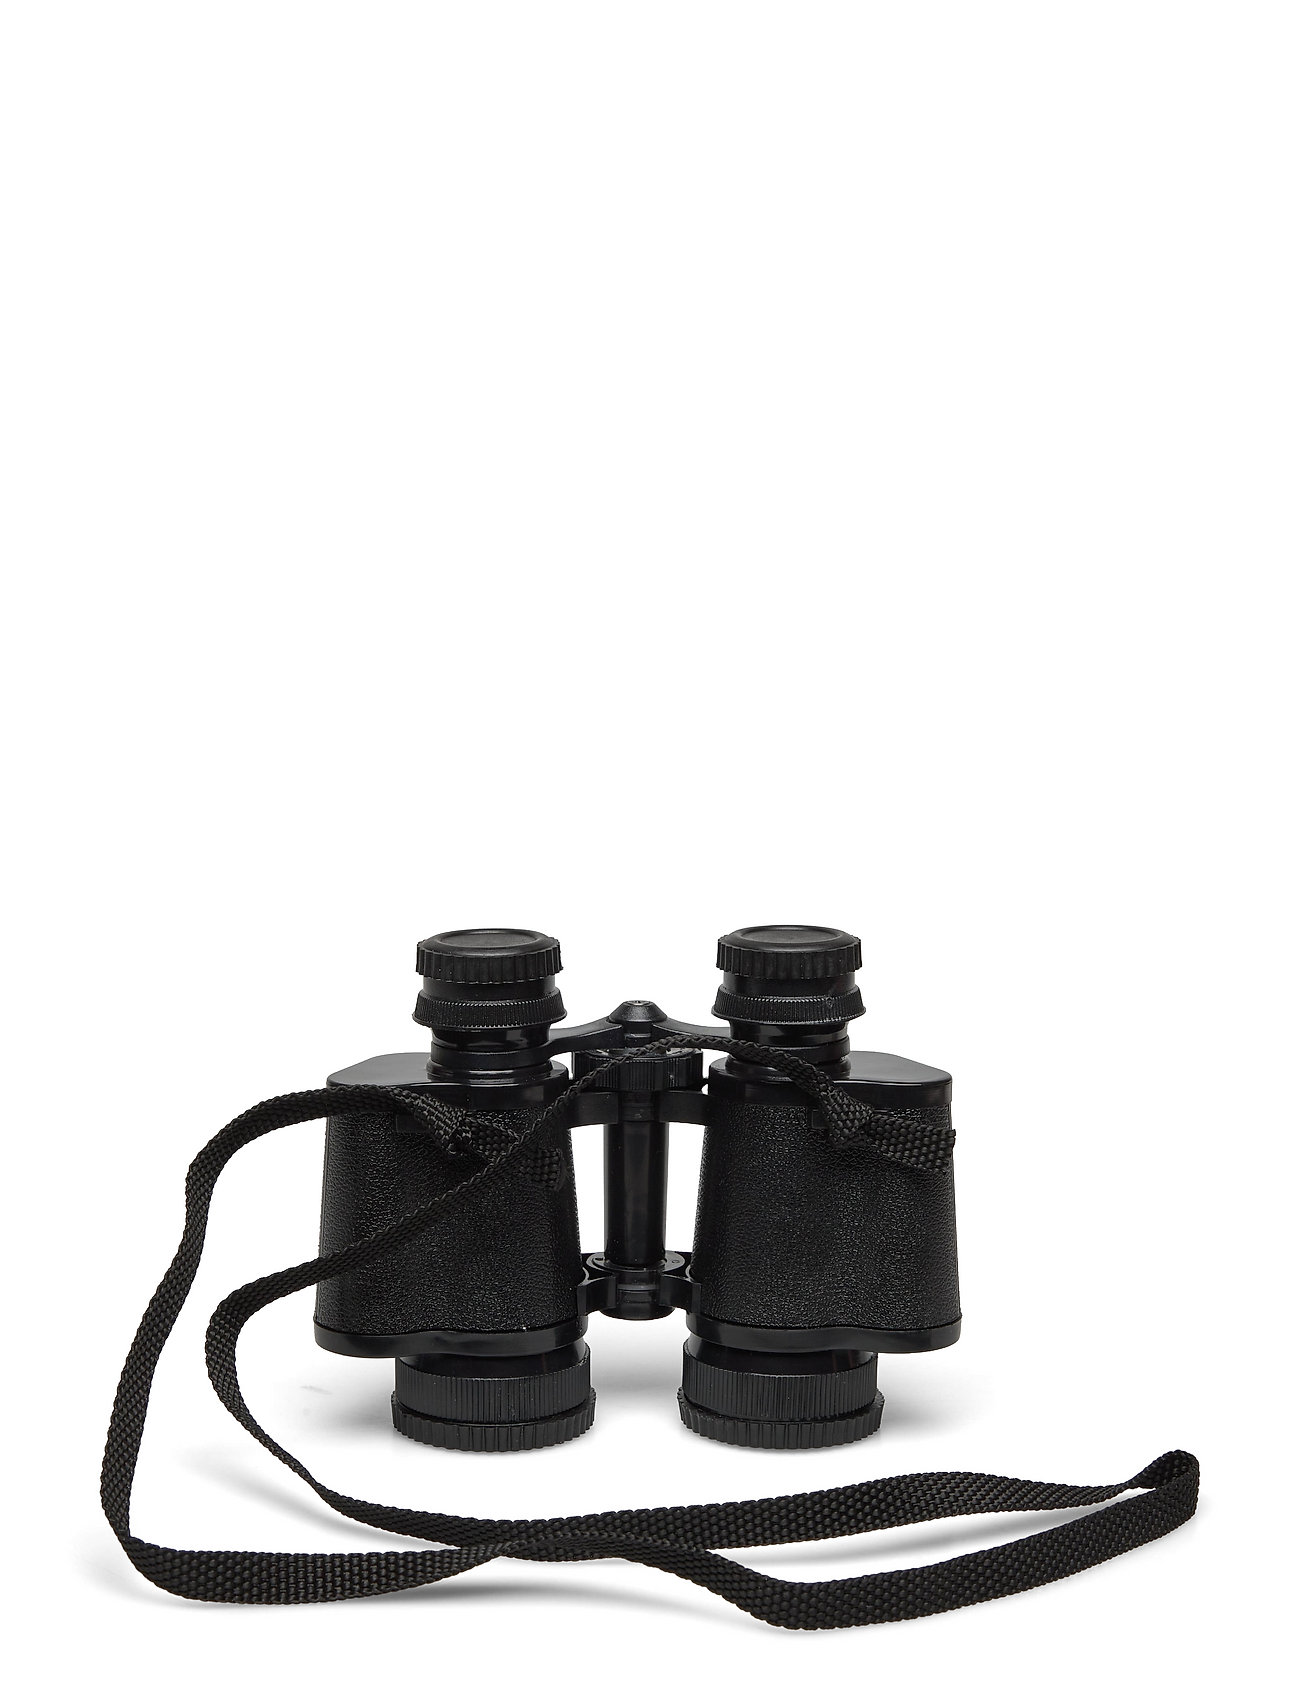 Binoculars "Special 40 Black" Without Carrying Case Toys Outdoor Toys Black Magni Toys